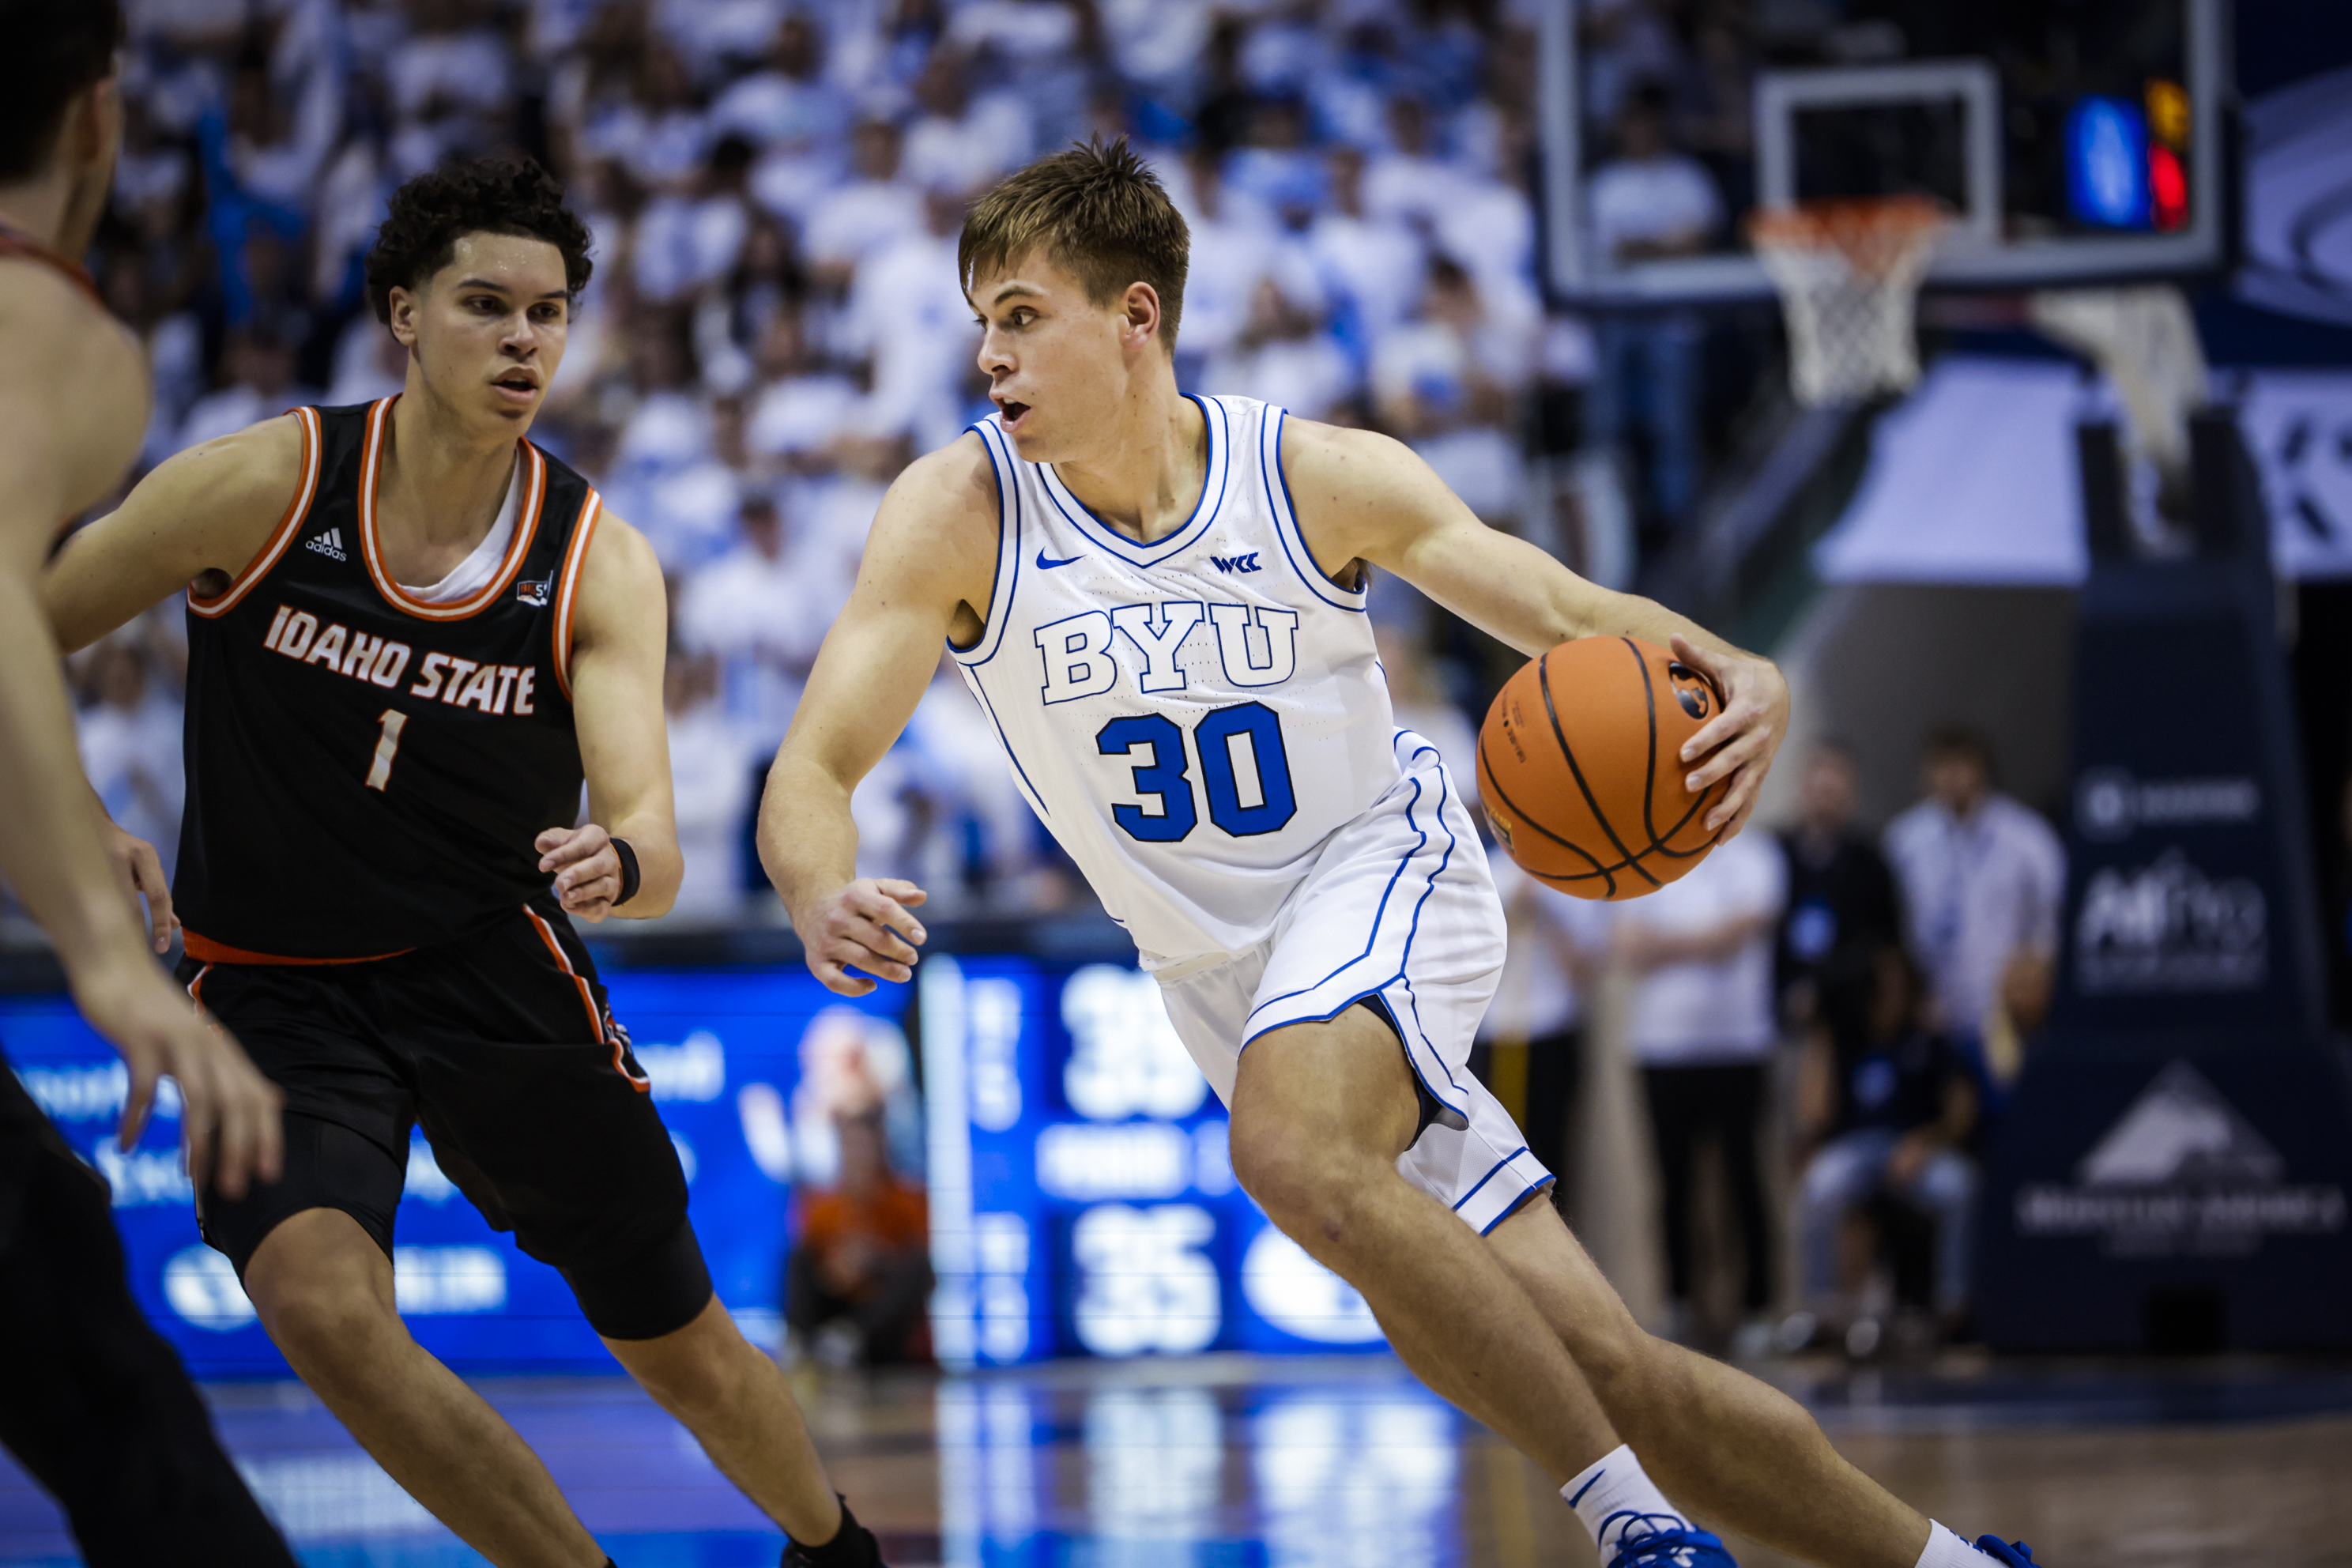 Dallin Hall dribbles to the basket during a game against Idaho State at the Marriott Center.